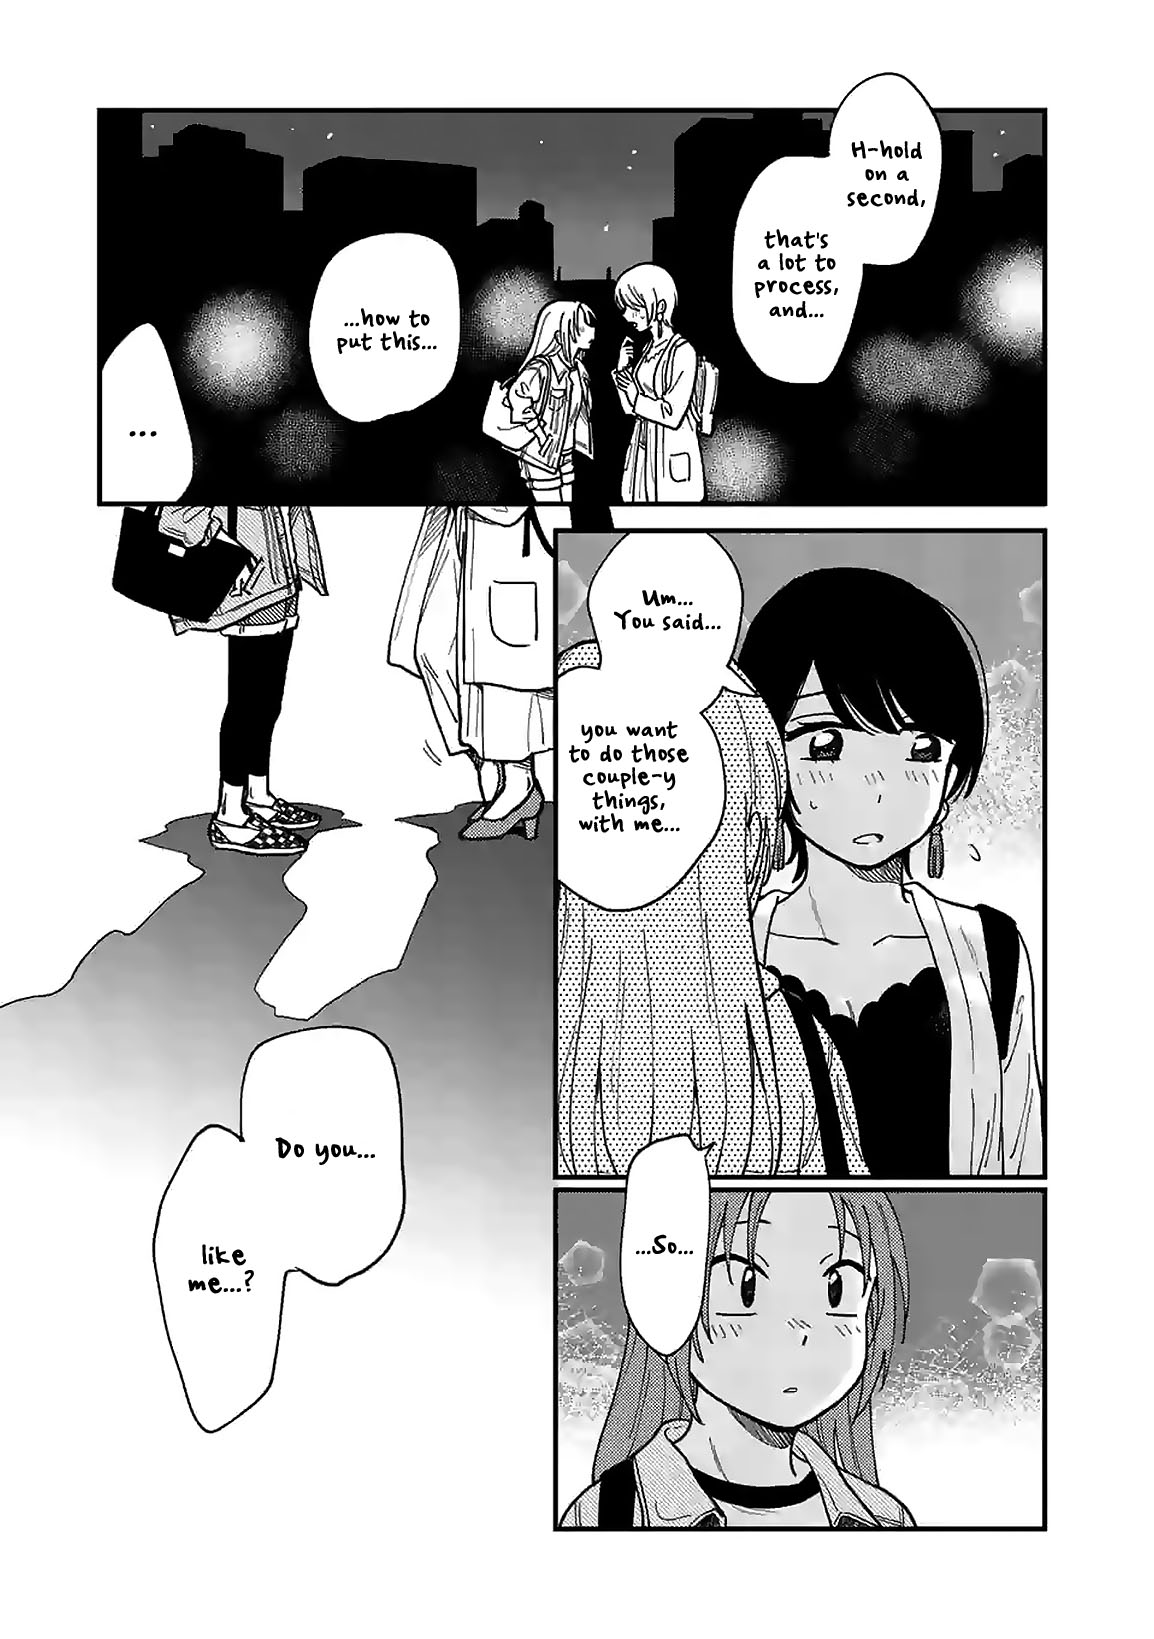 So, Do You Want To Go Out, Or? Ch. 2